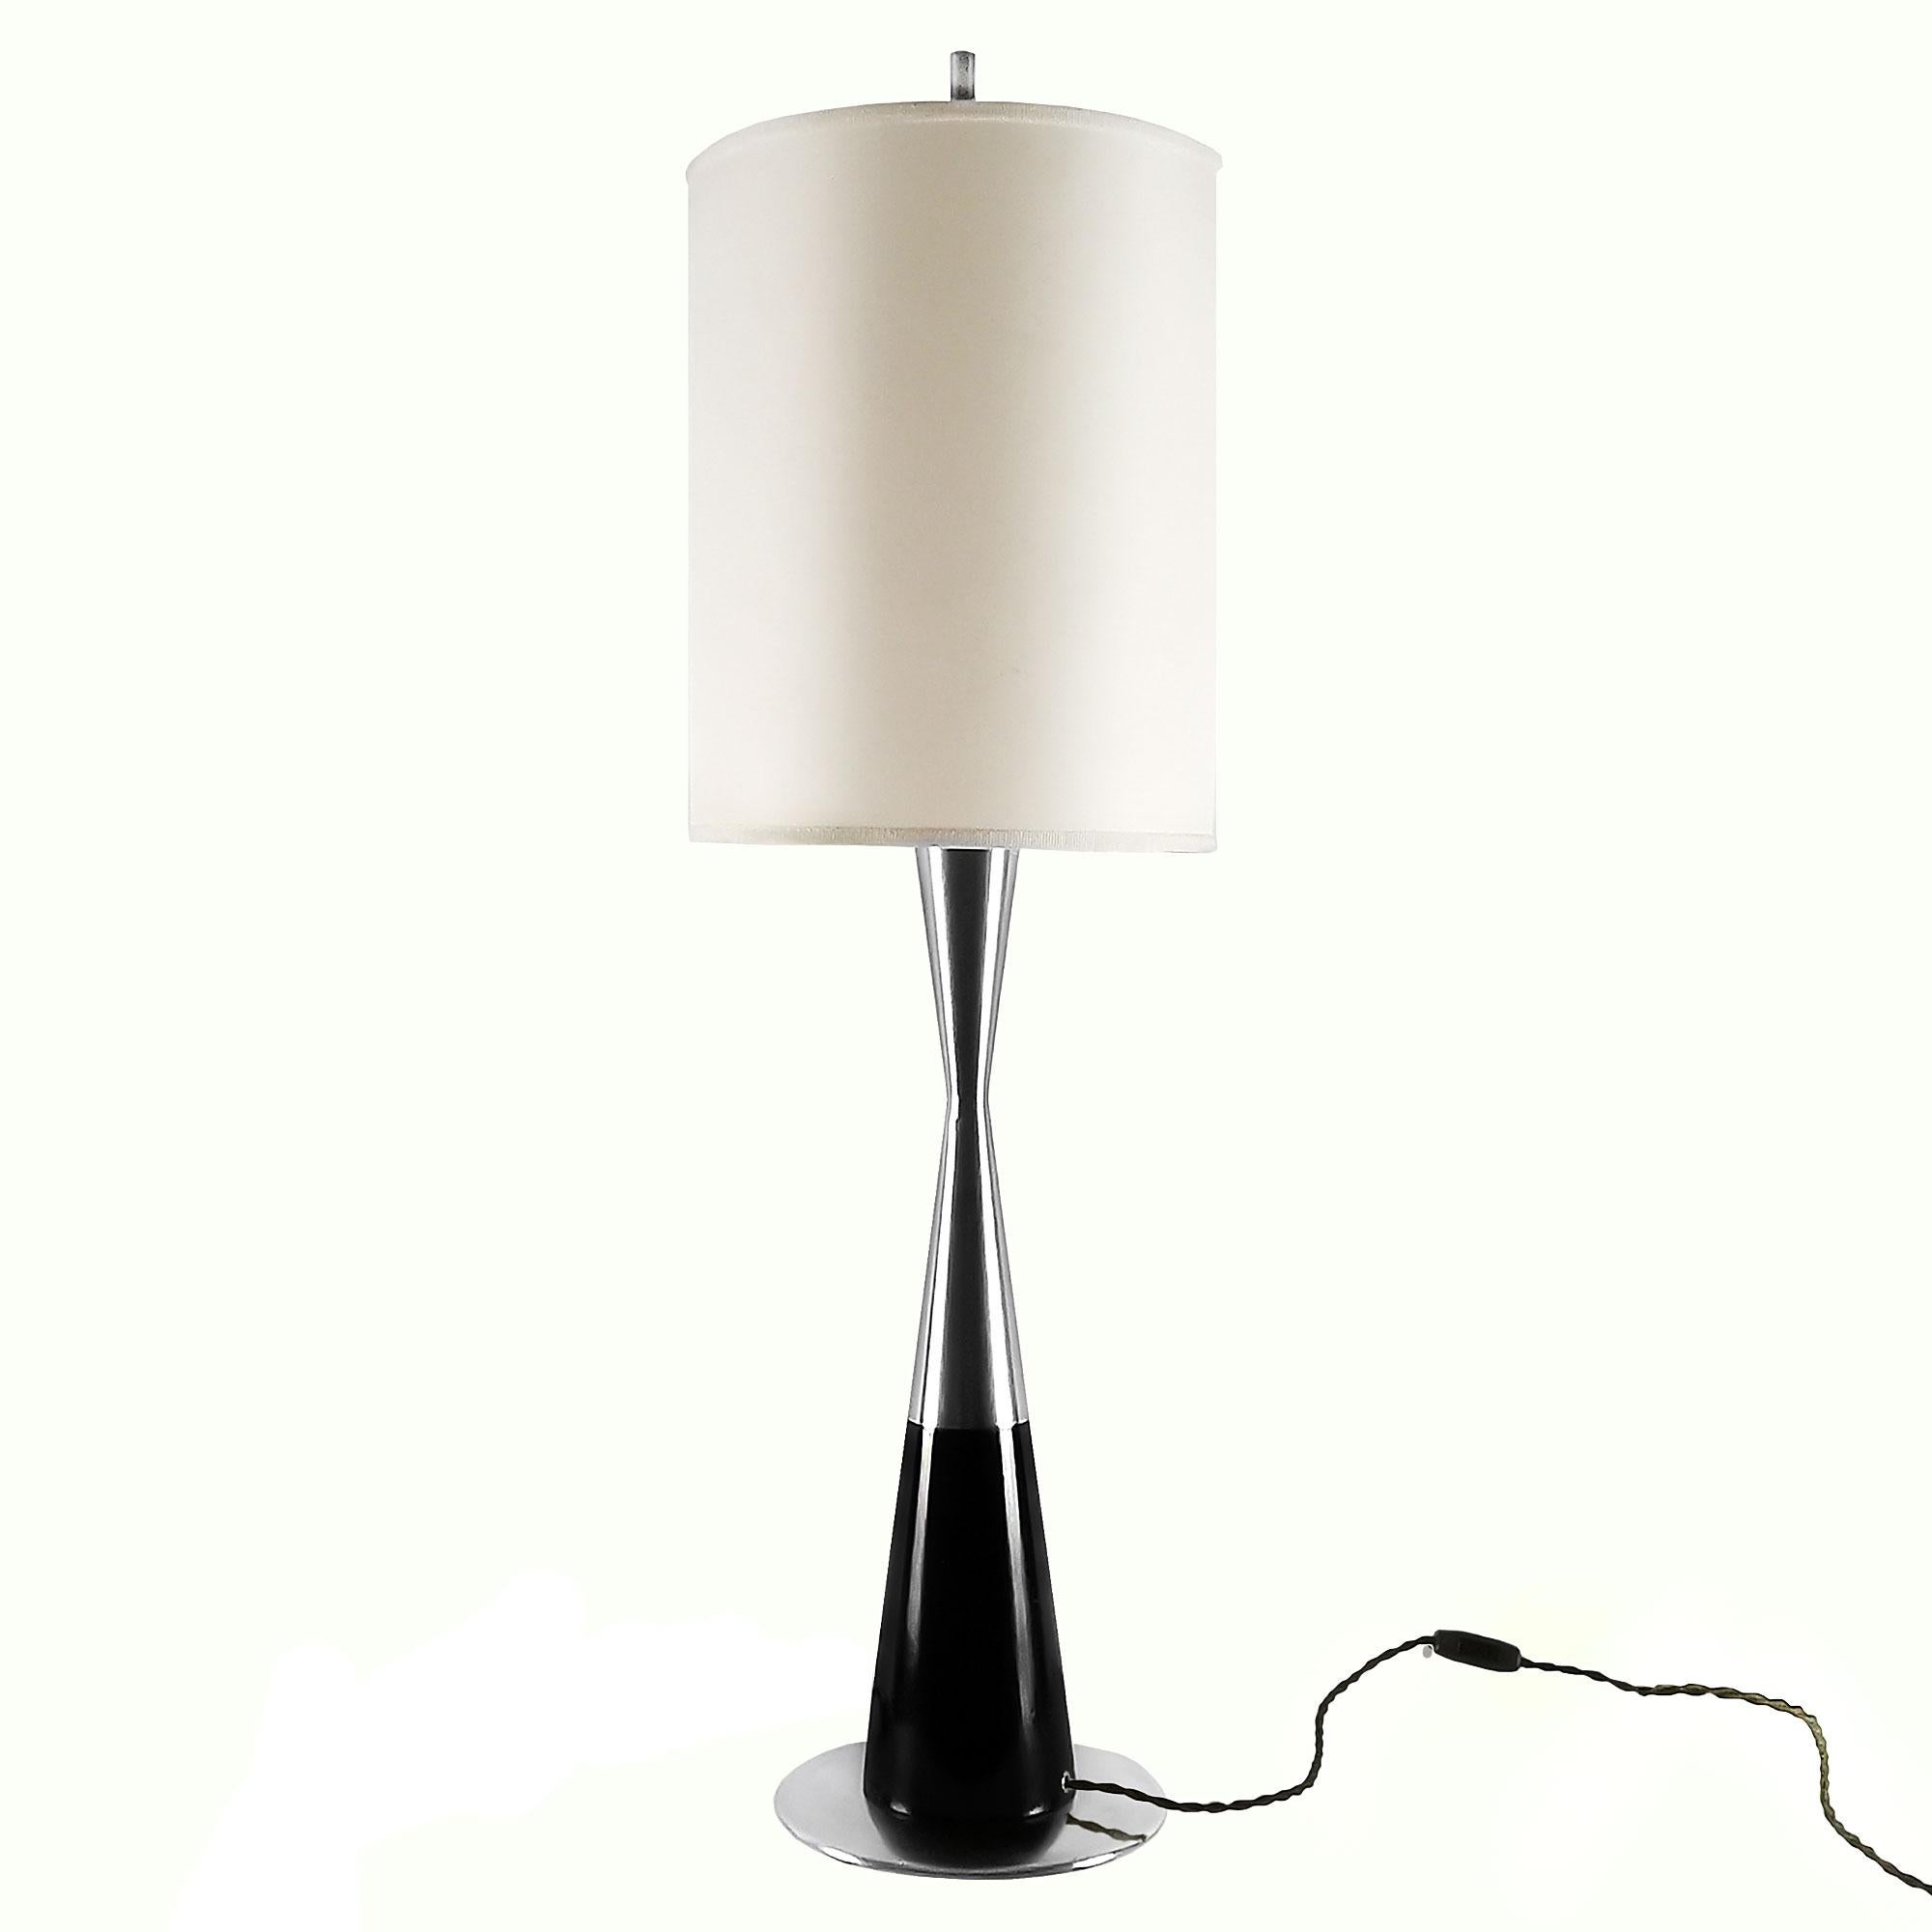 Large table lamp, brushed steel and stained and varnished wood, white fabric lampshade.
Model: 8058
Maker: STILNOVO (label)

Italy c. 1960.